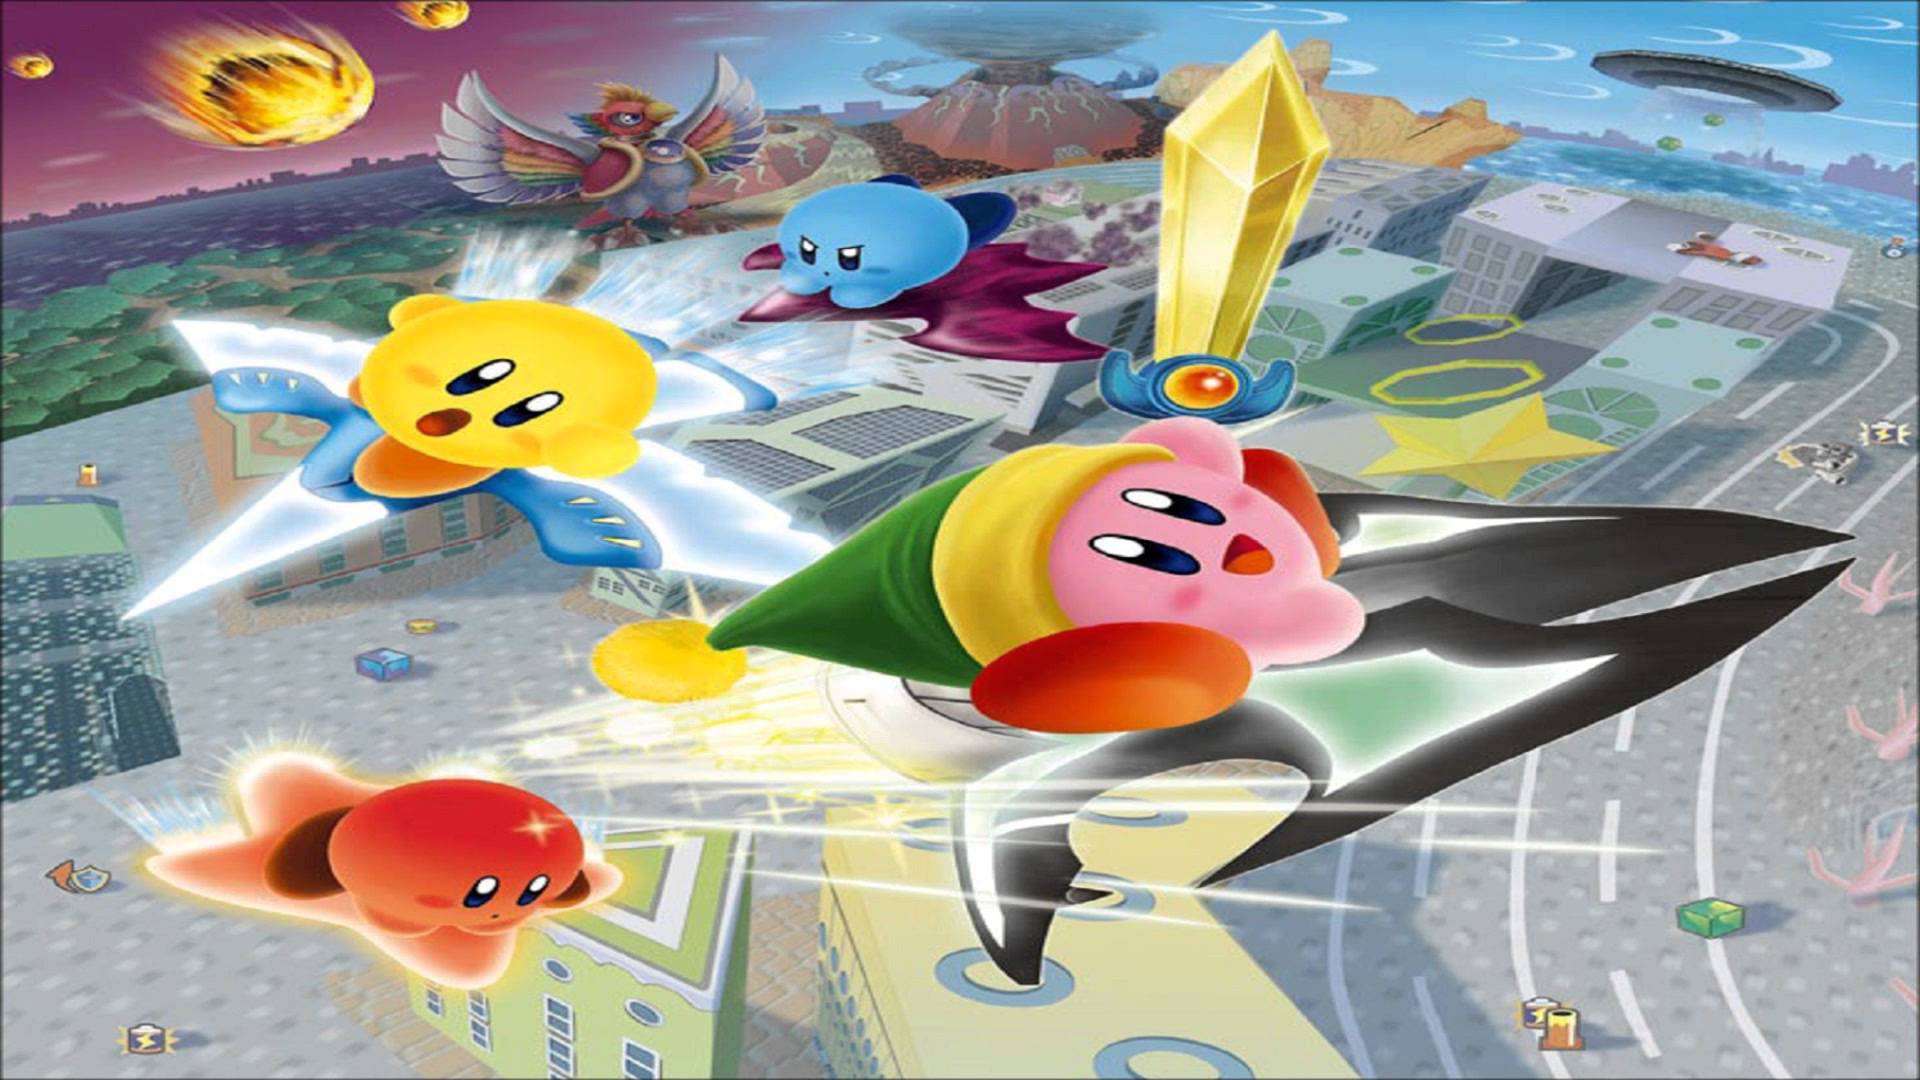 Kirby Air Ride Backgrounds, Compatible - PC, Mobile, Gadgets| 1920x1080 px